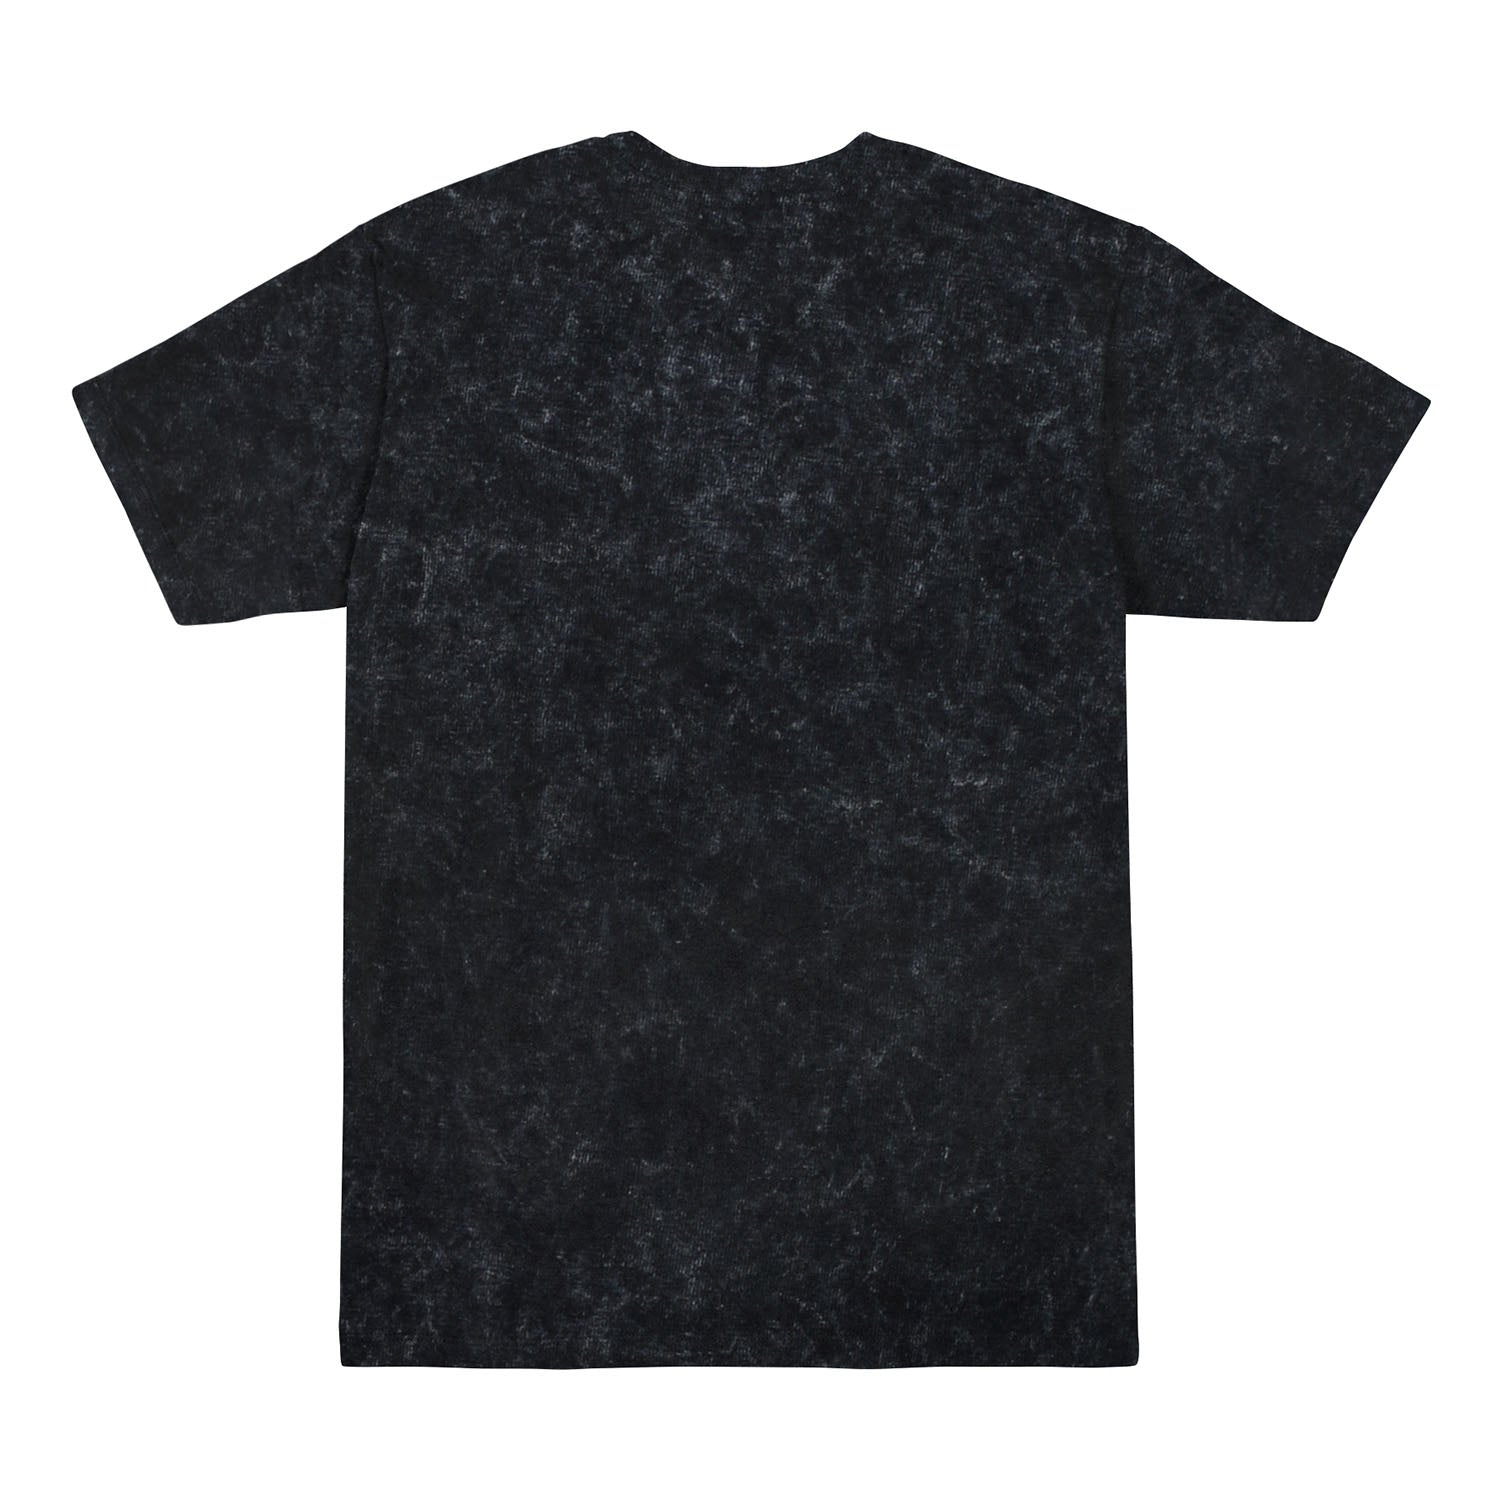 Call of Duty Demon Lobby Mineral Wash T-Shirt